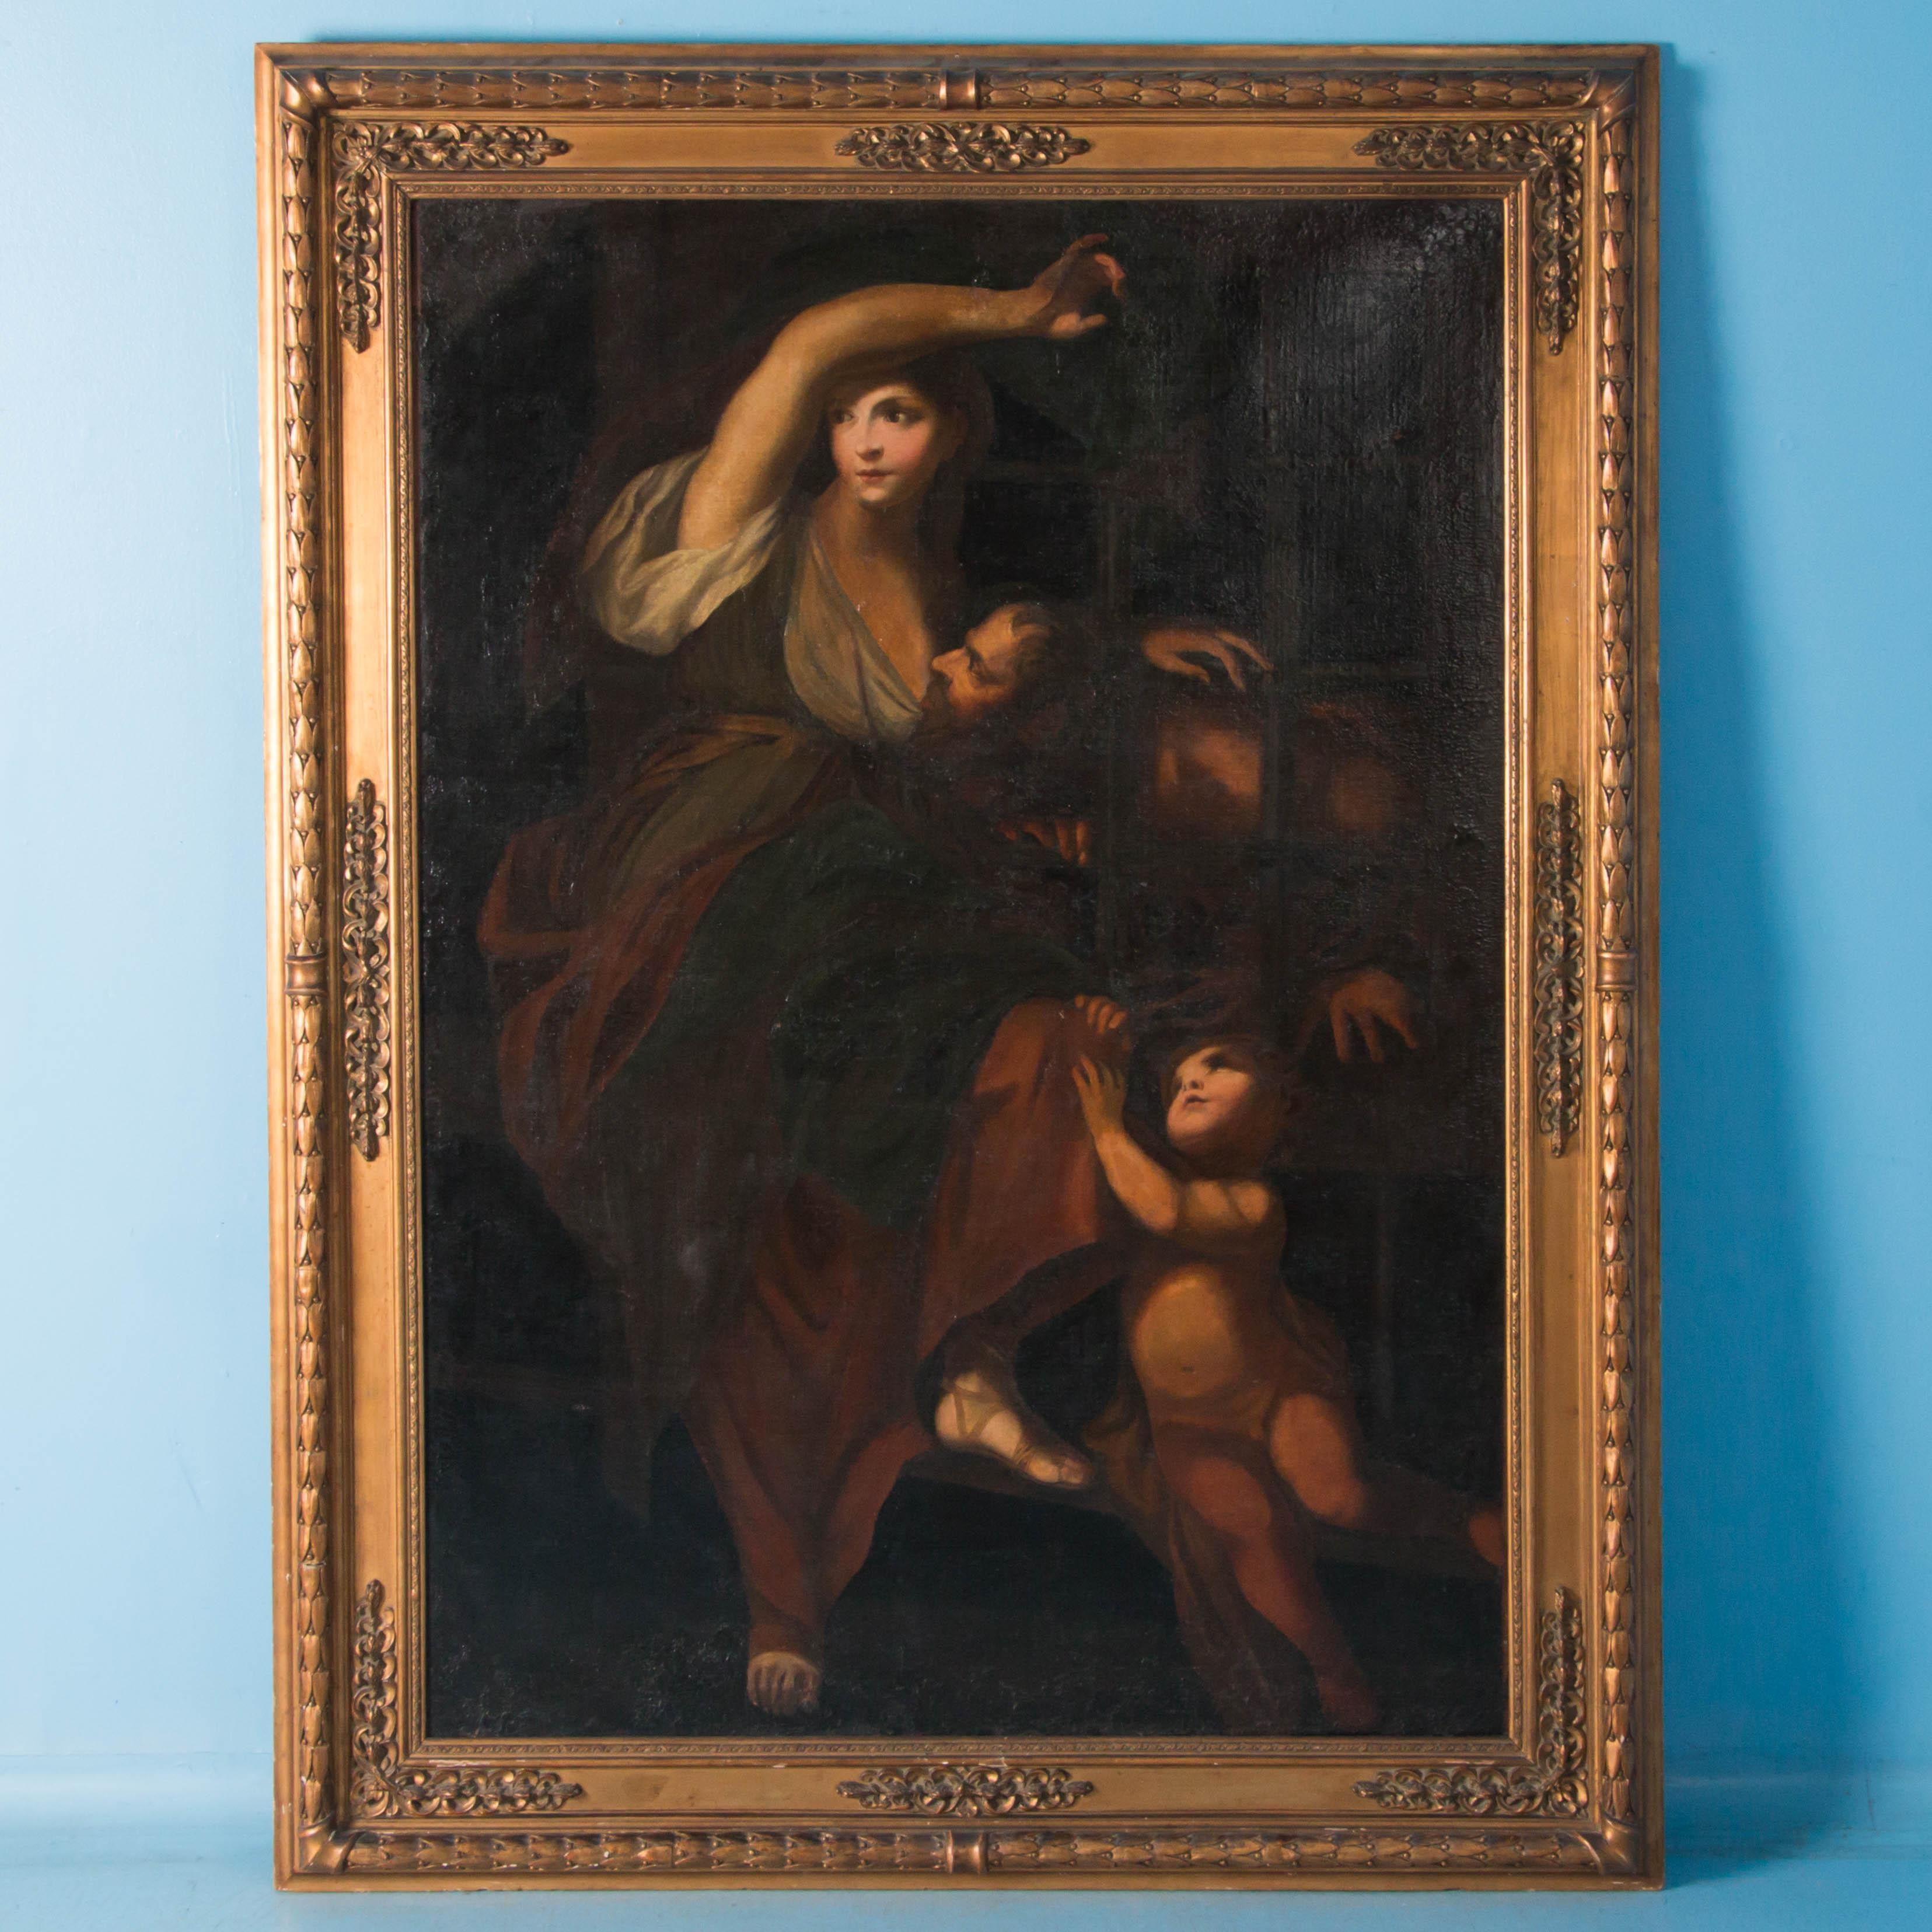 Painted in the late 18th or early 19th century this large allegorical oil painting, 